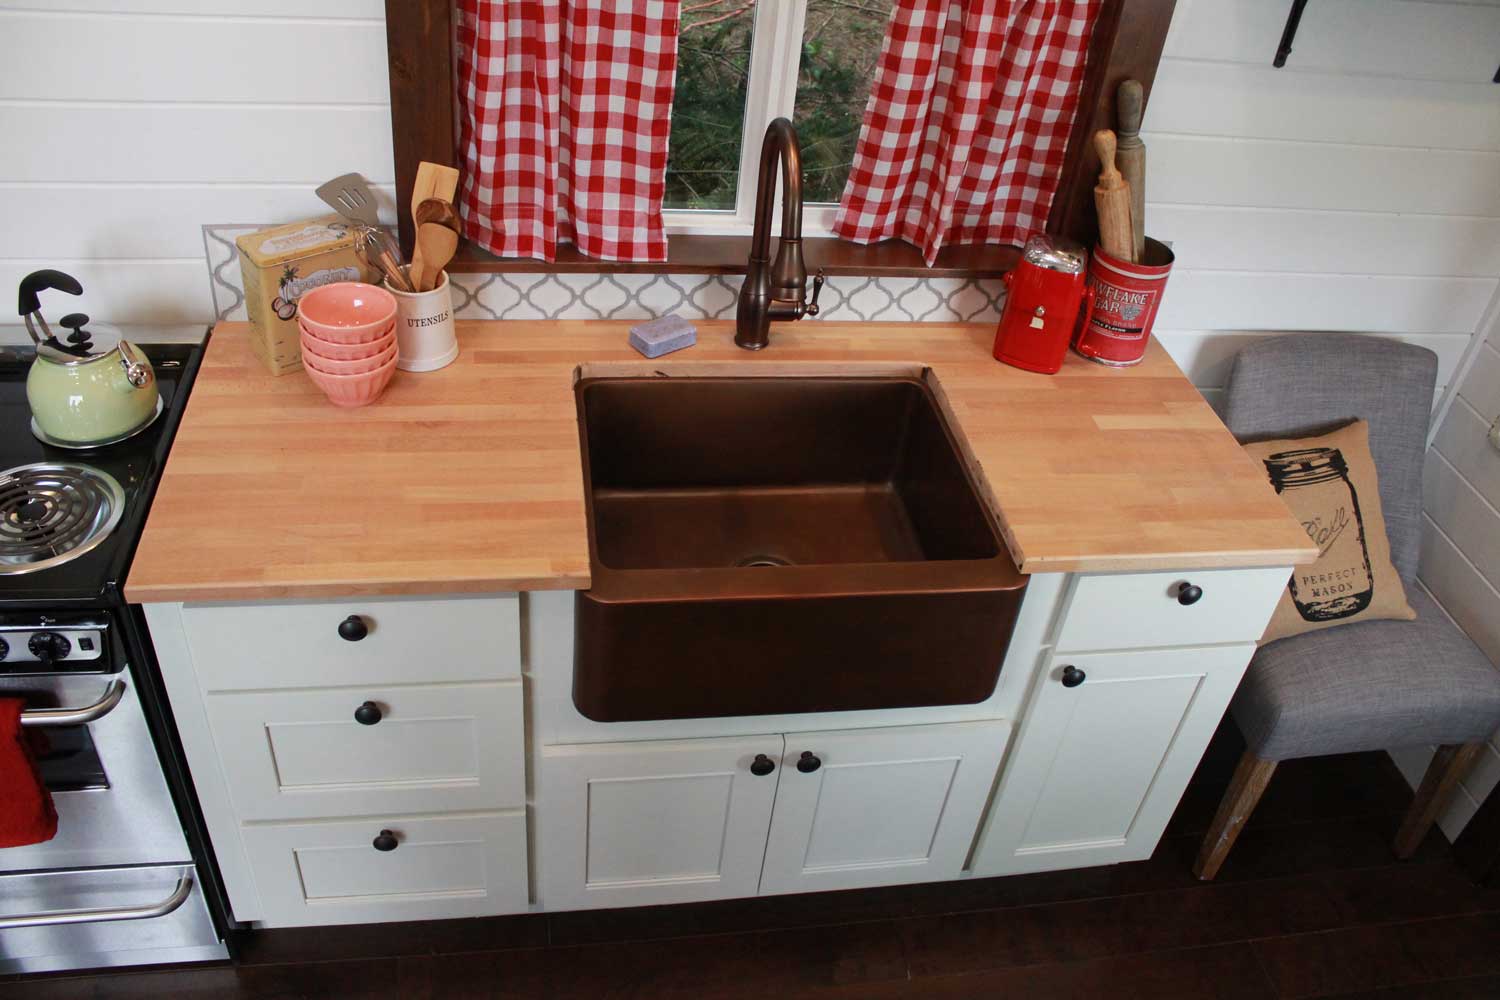 Kitchen counter and sink in the Retro Southern Charm custom tiny house